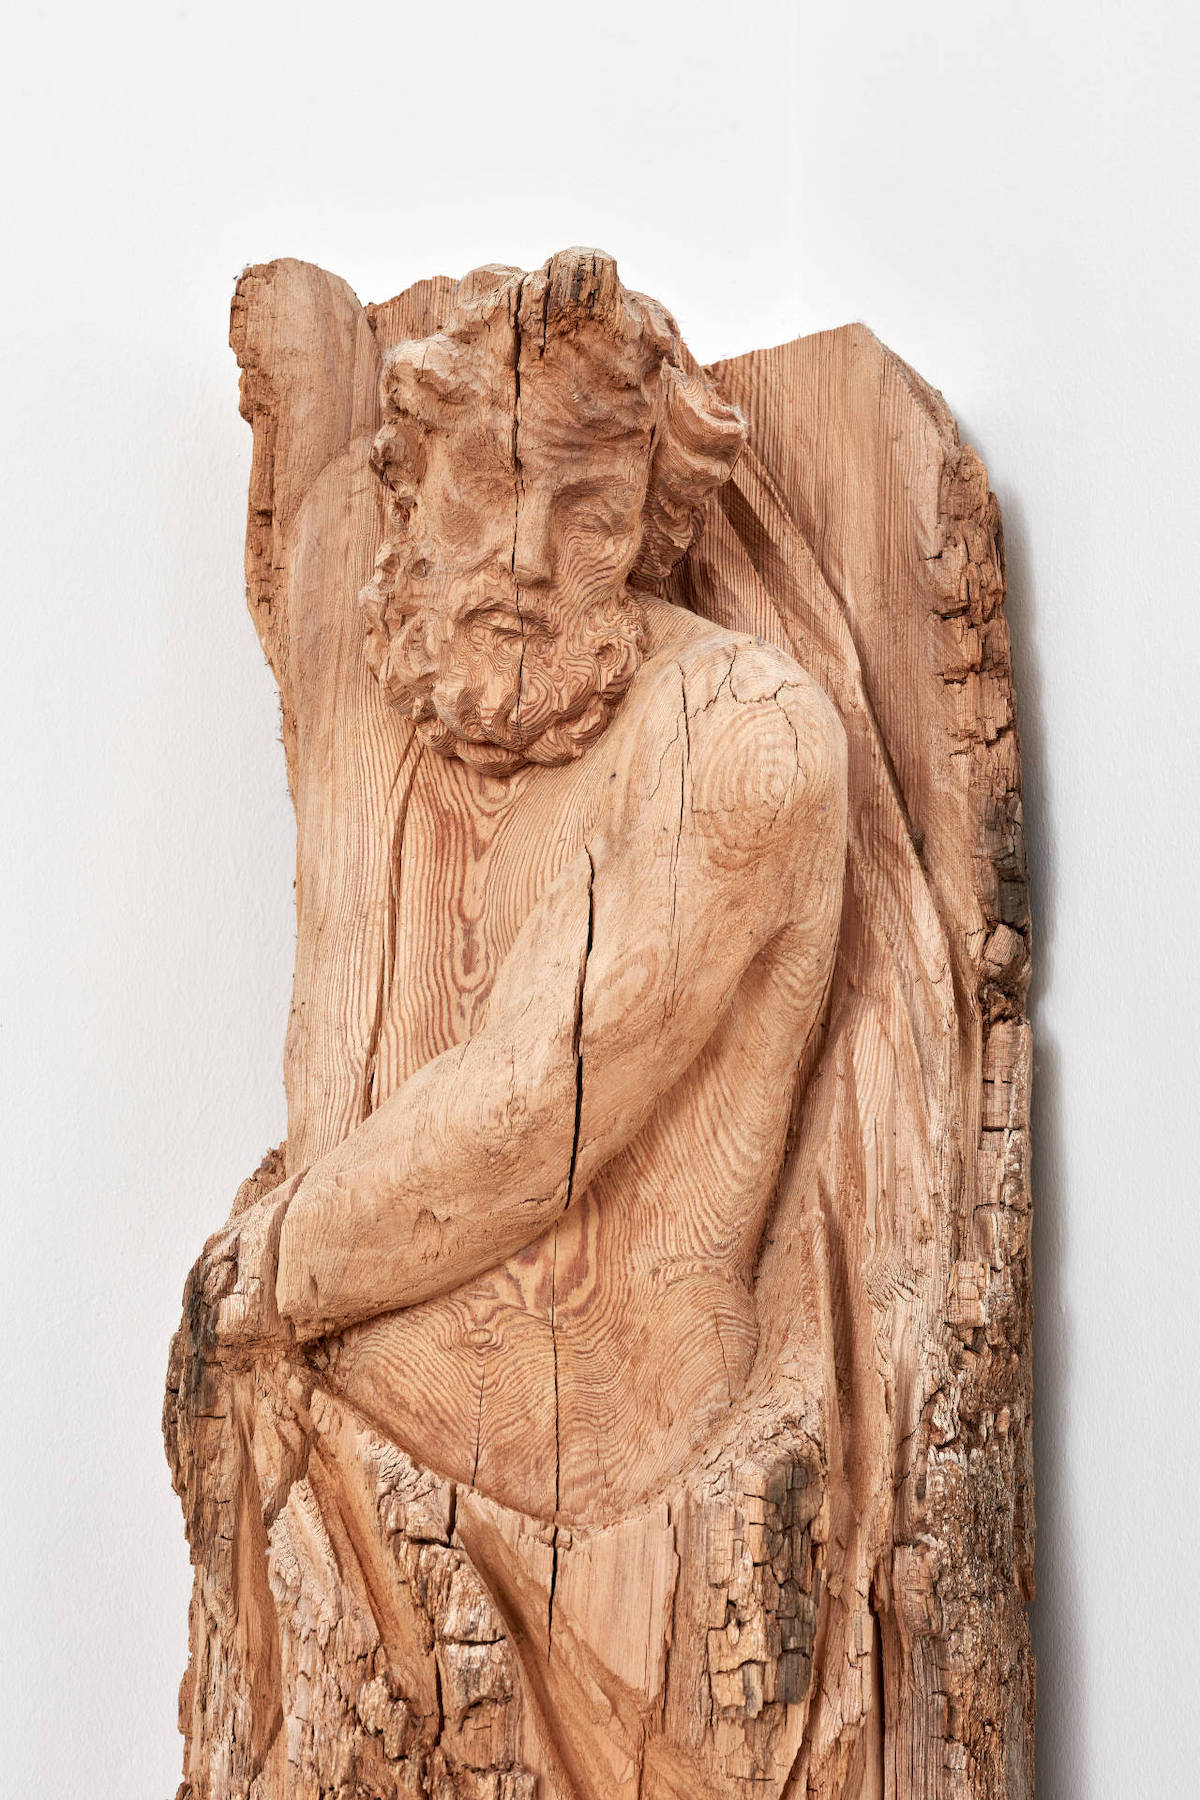 The History of Wood Carving in Art